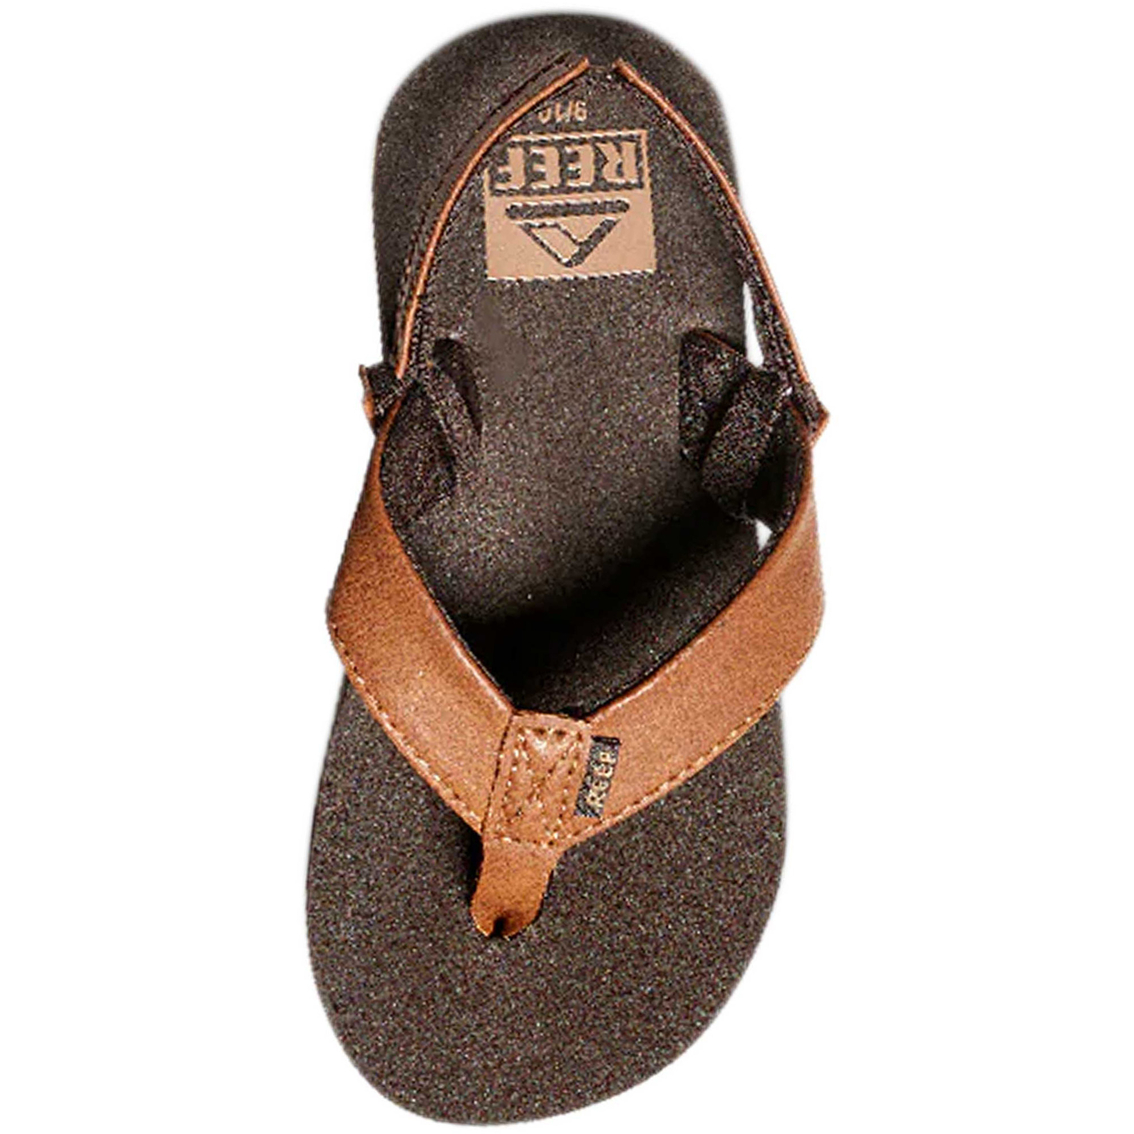 Reef Toddler Boys Little Twinpin Sandals - Image 2 of 4